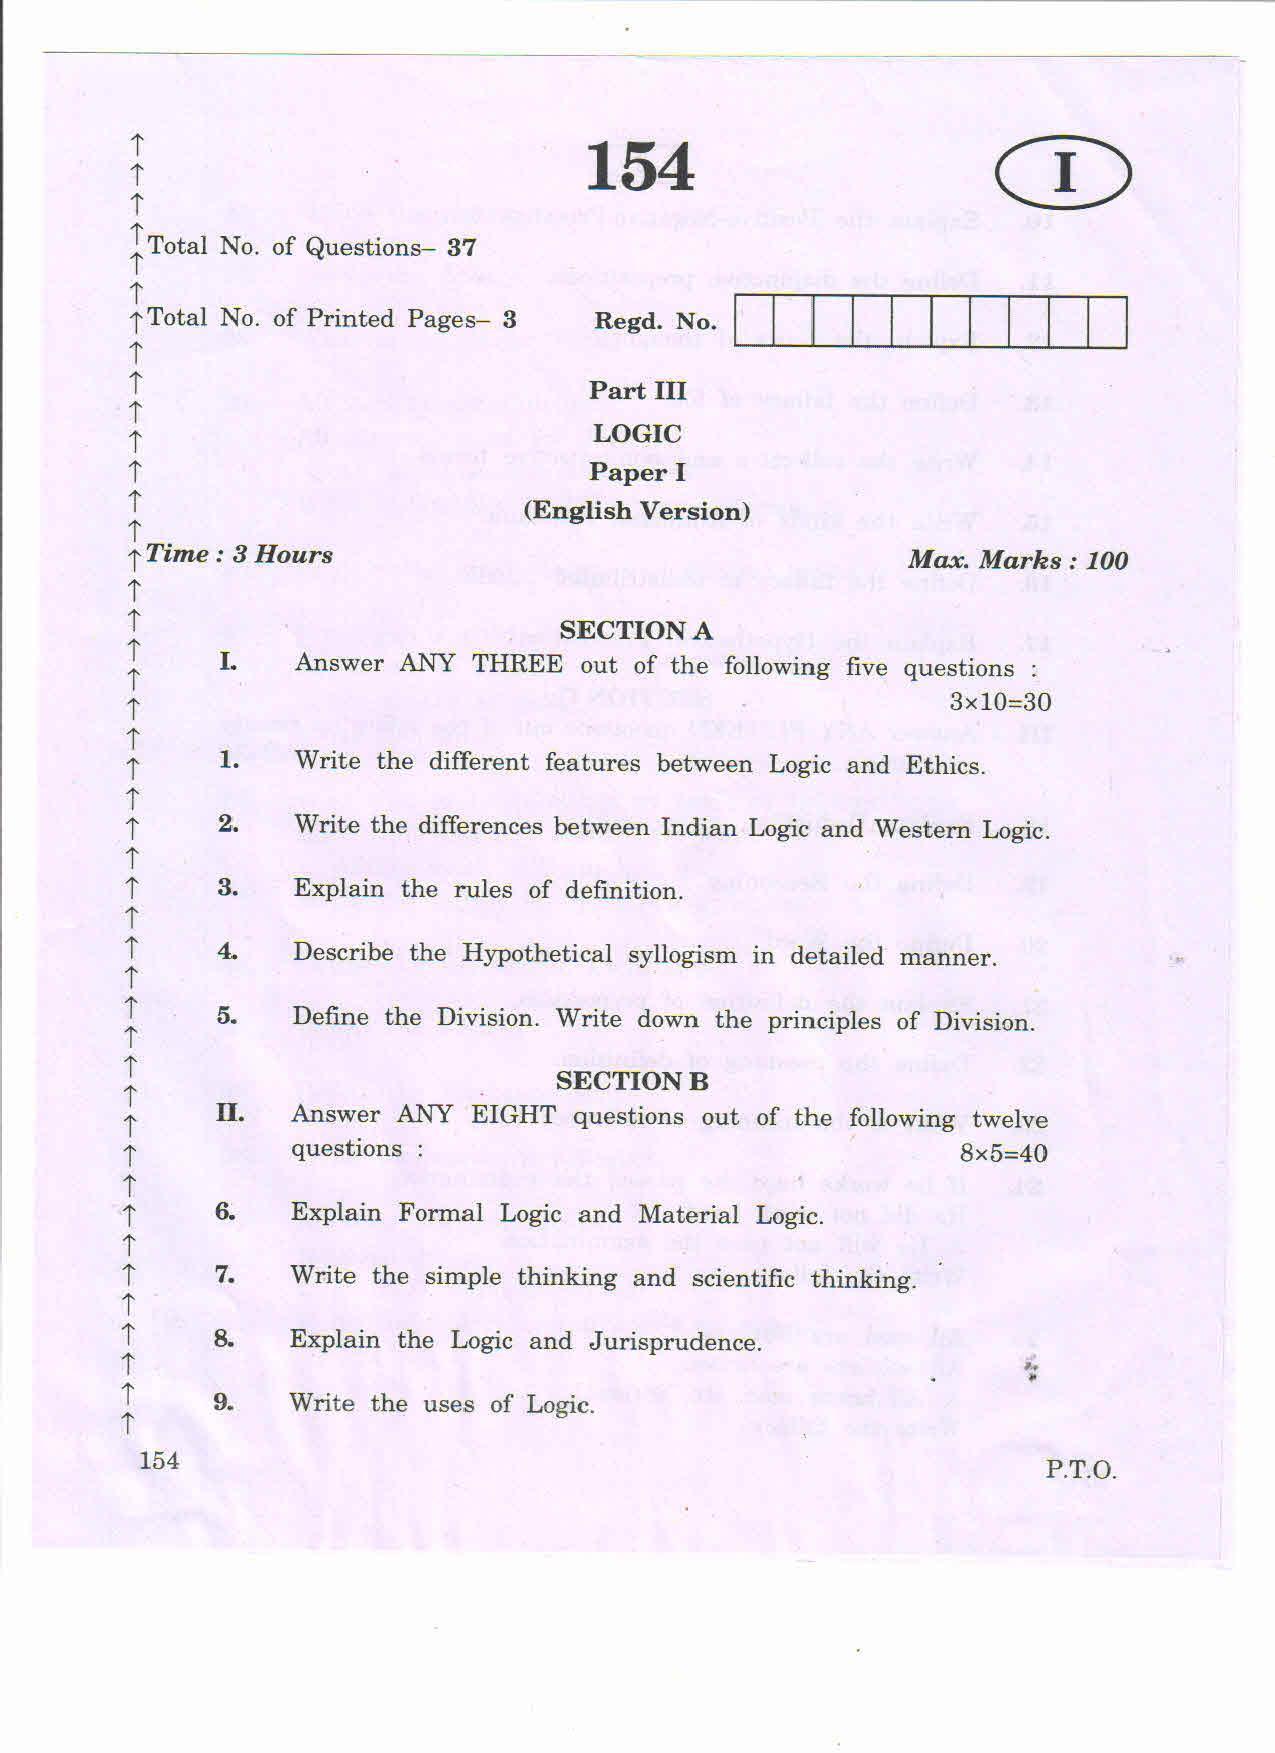 AP 2nd Year General Question Paper March - 2020 - LOGIC-I (EM) - Page 1